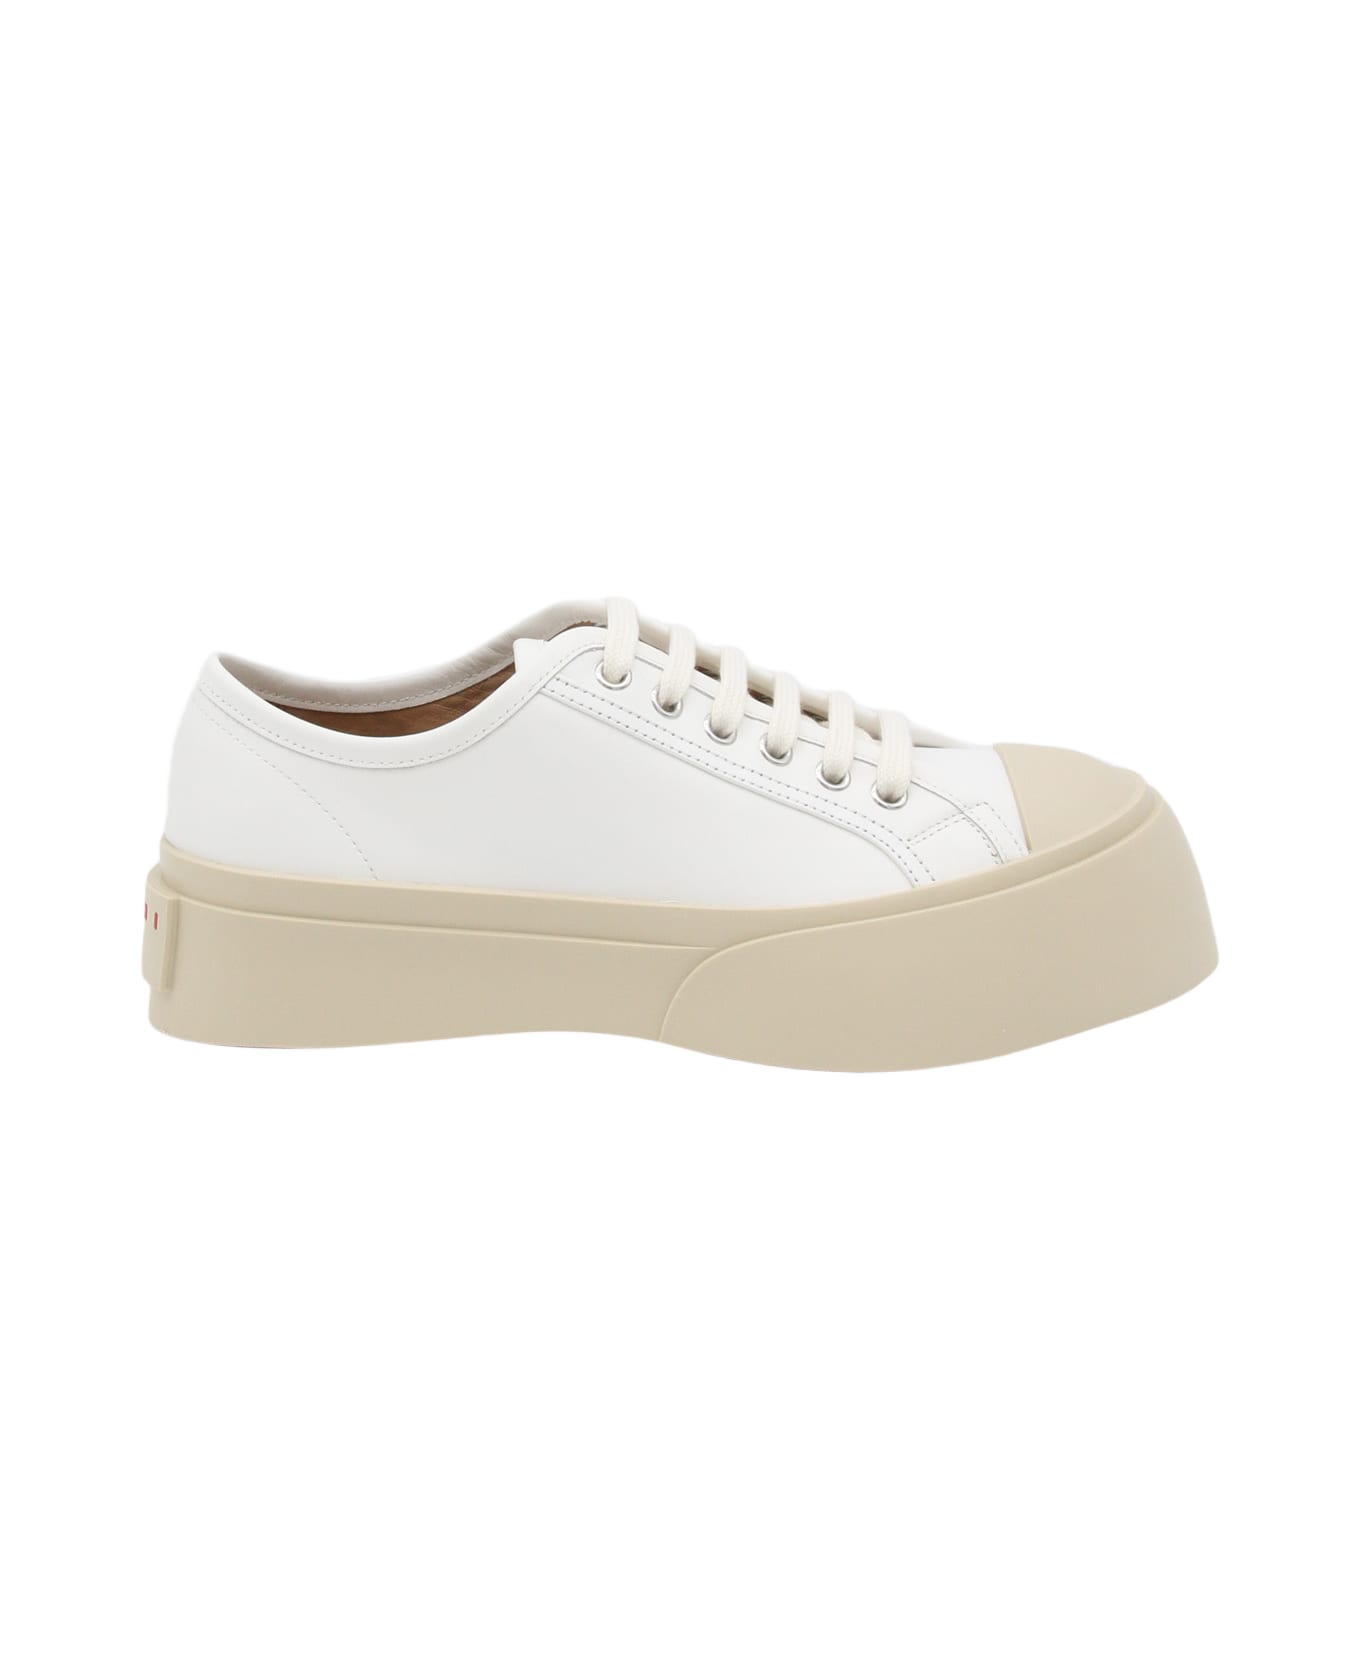 Marni White Leather Pablo Sneakers - Lily white